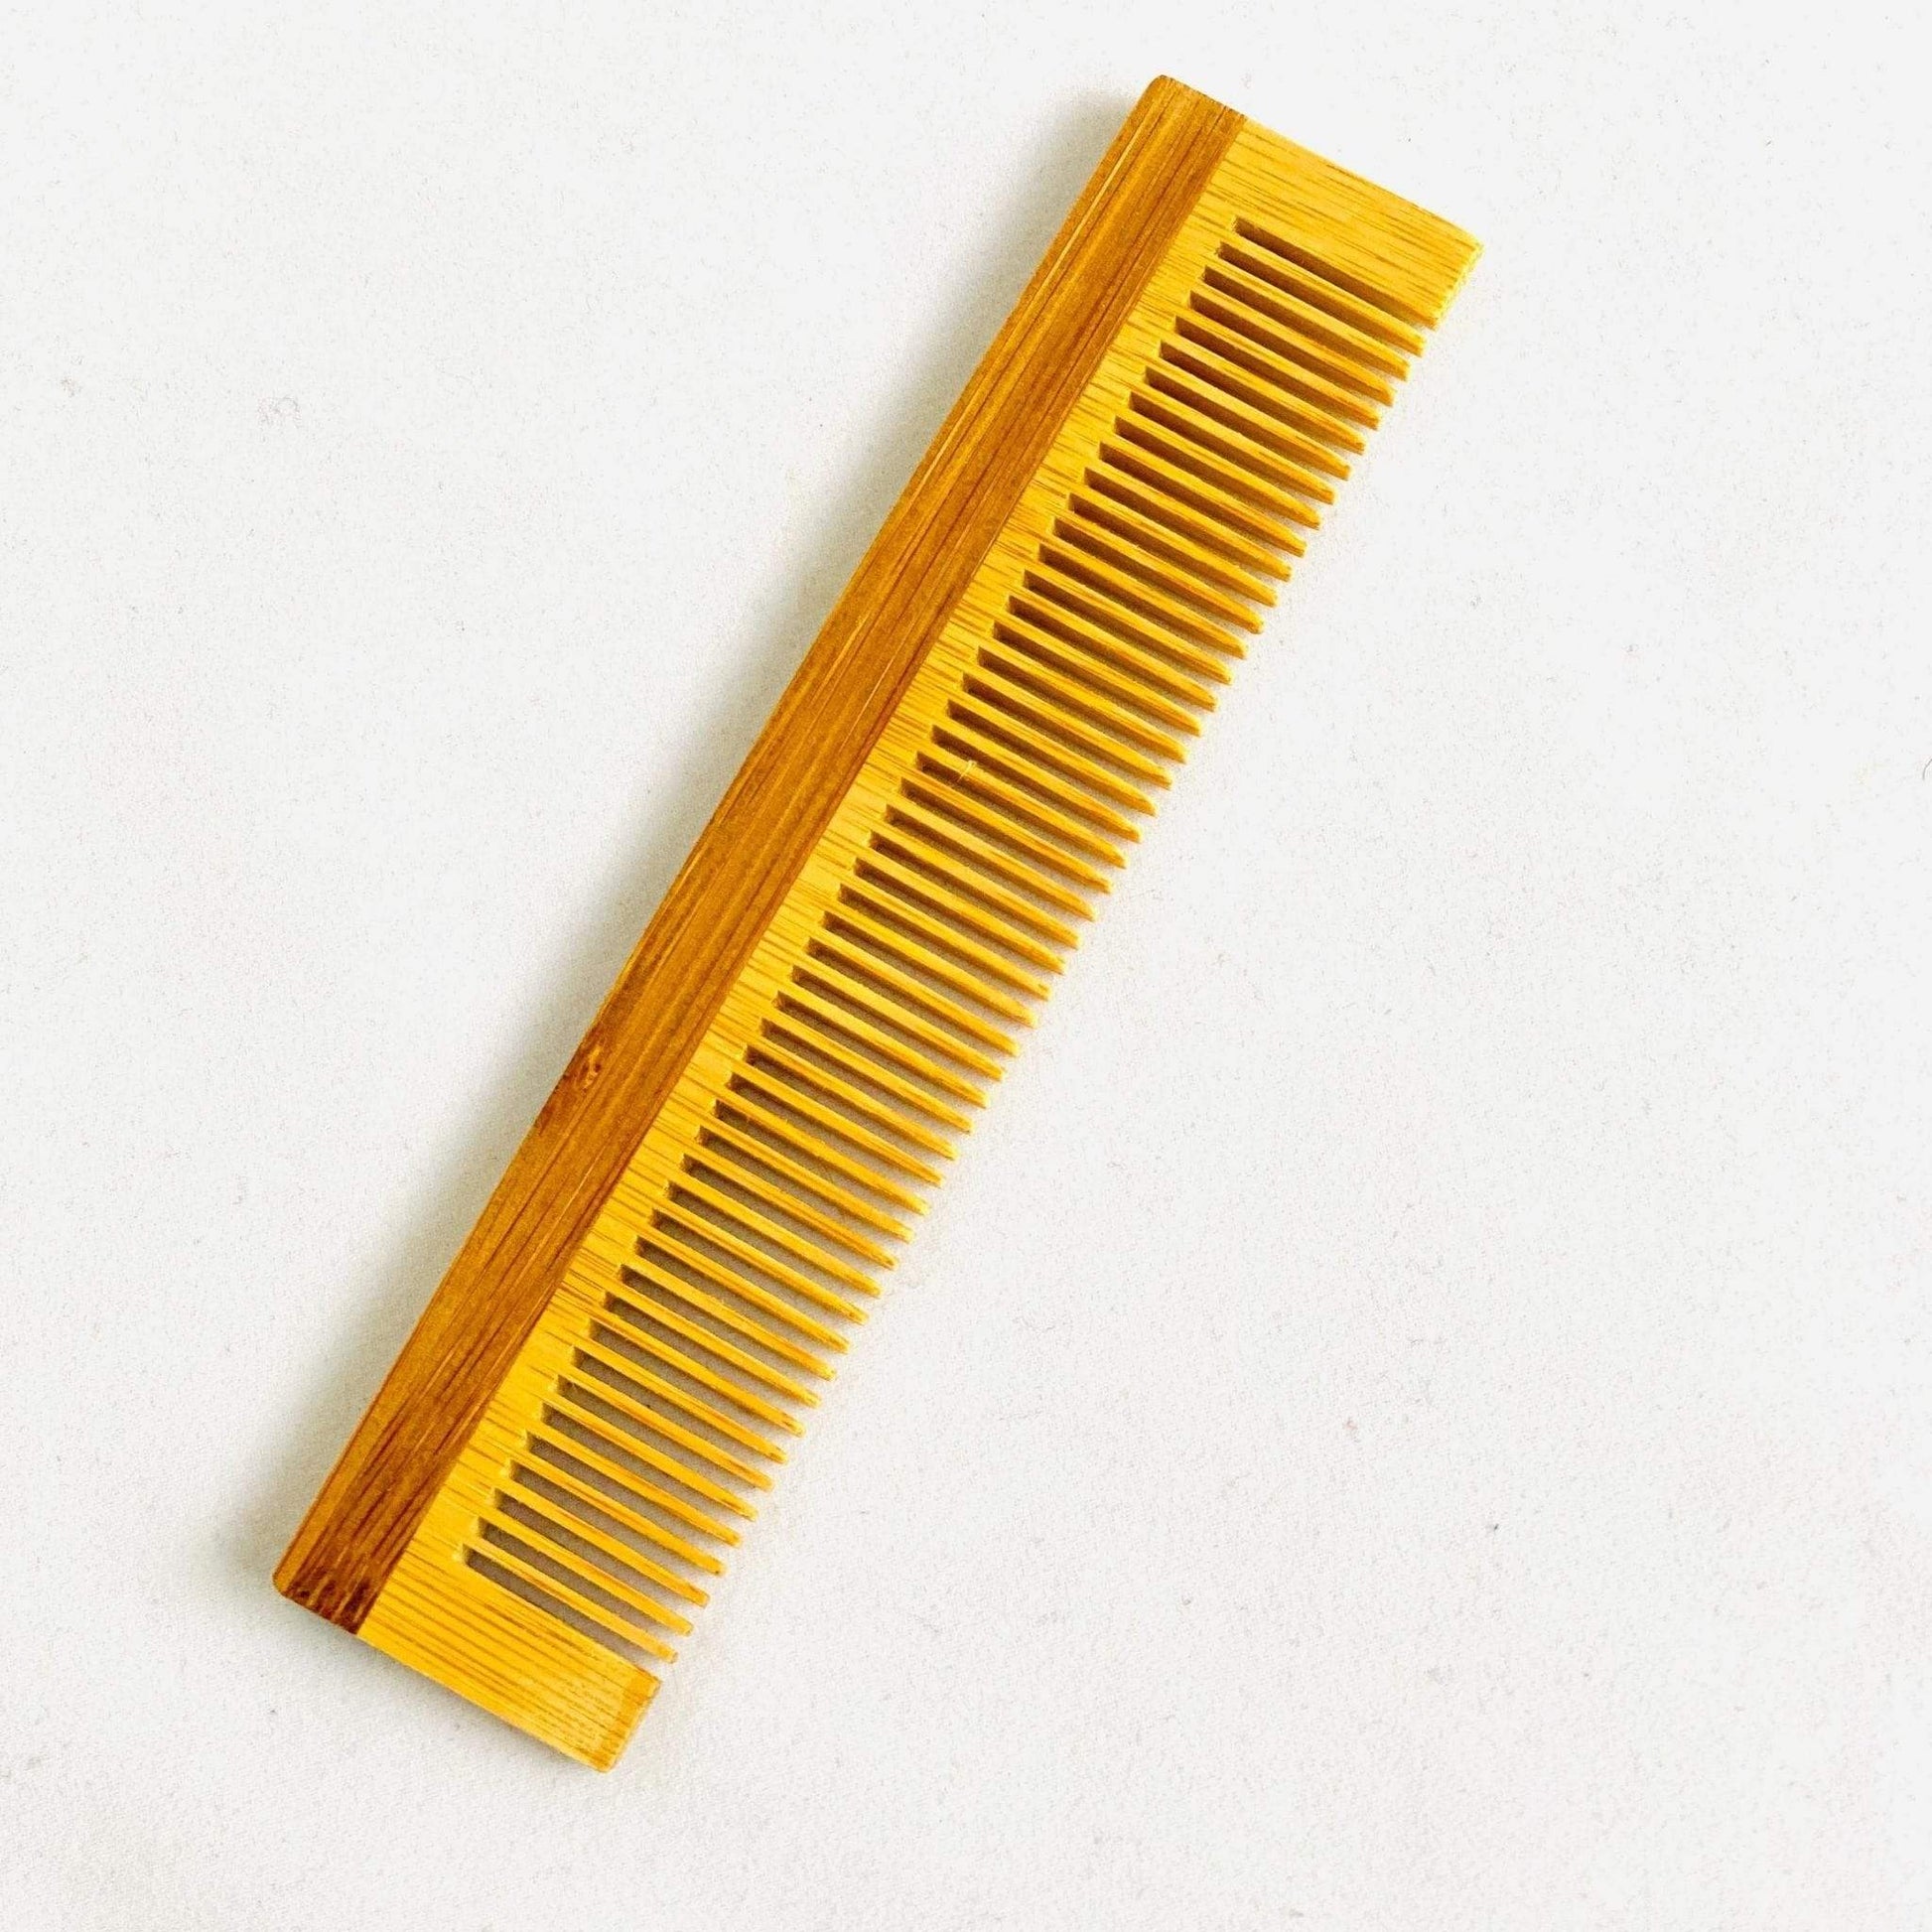 Pure Skin 2 in 1 Beard and Hair Styling Comb